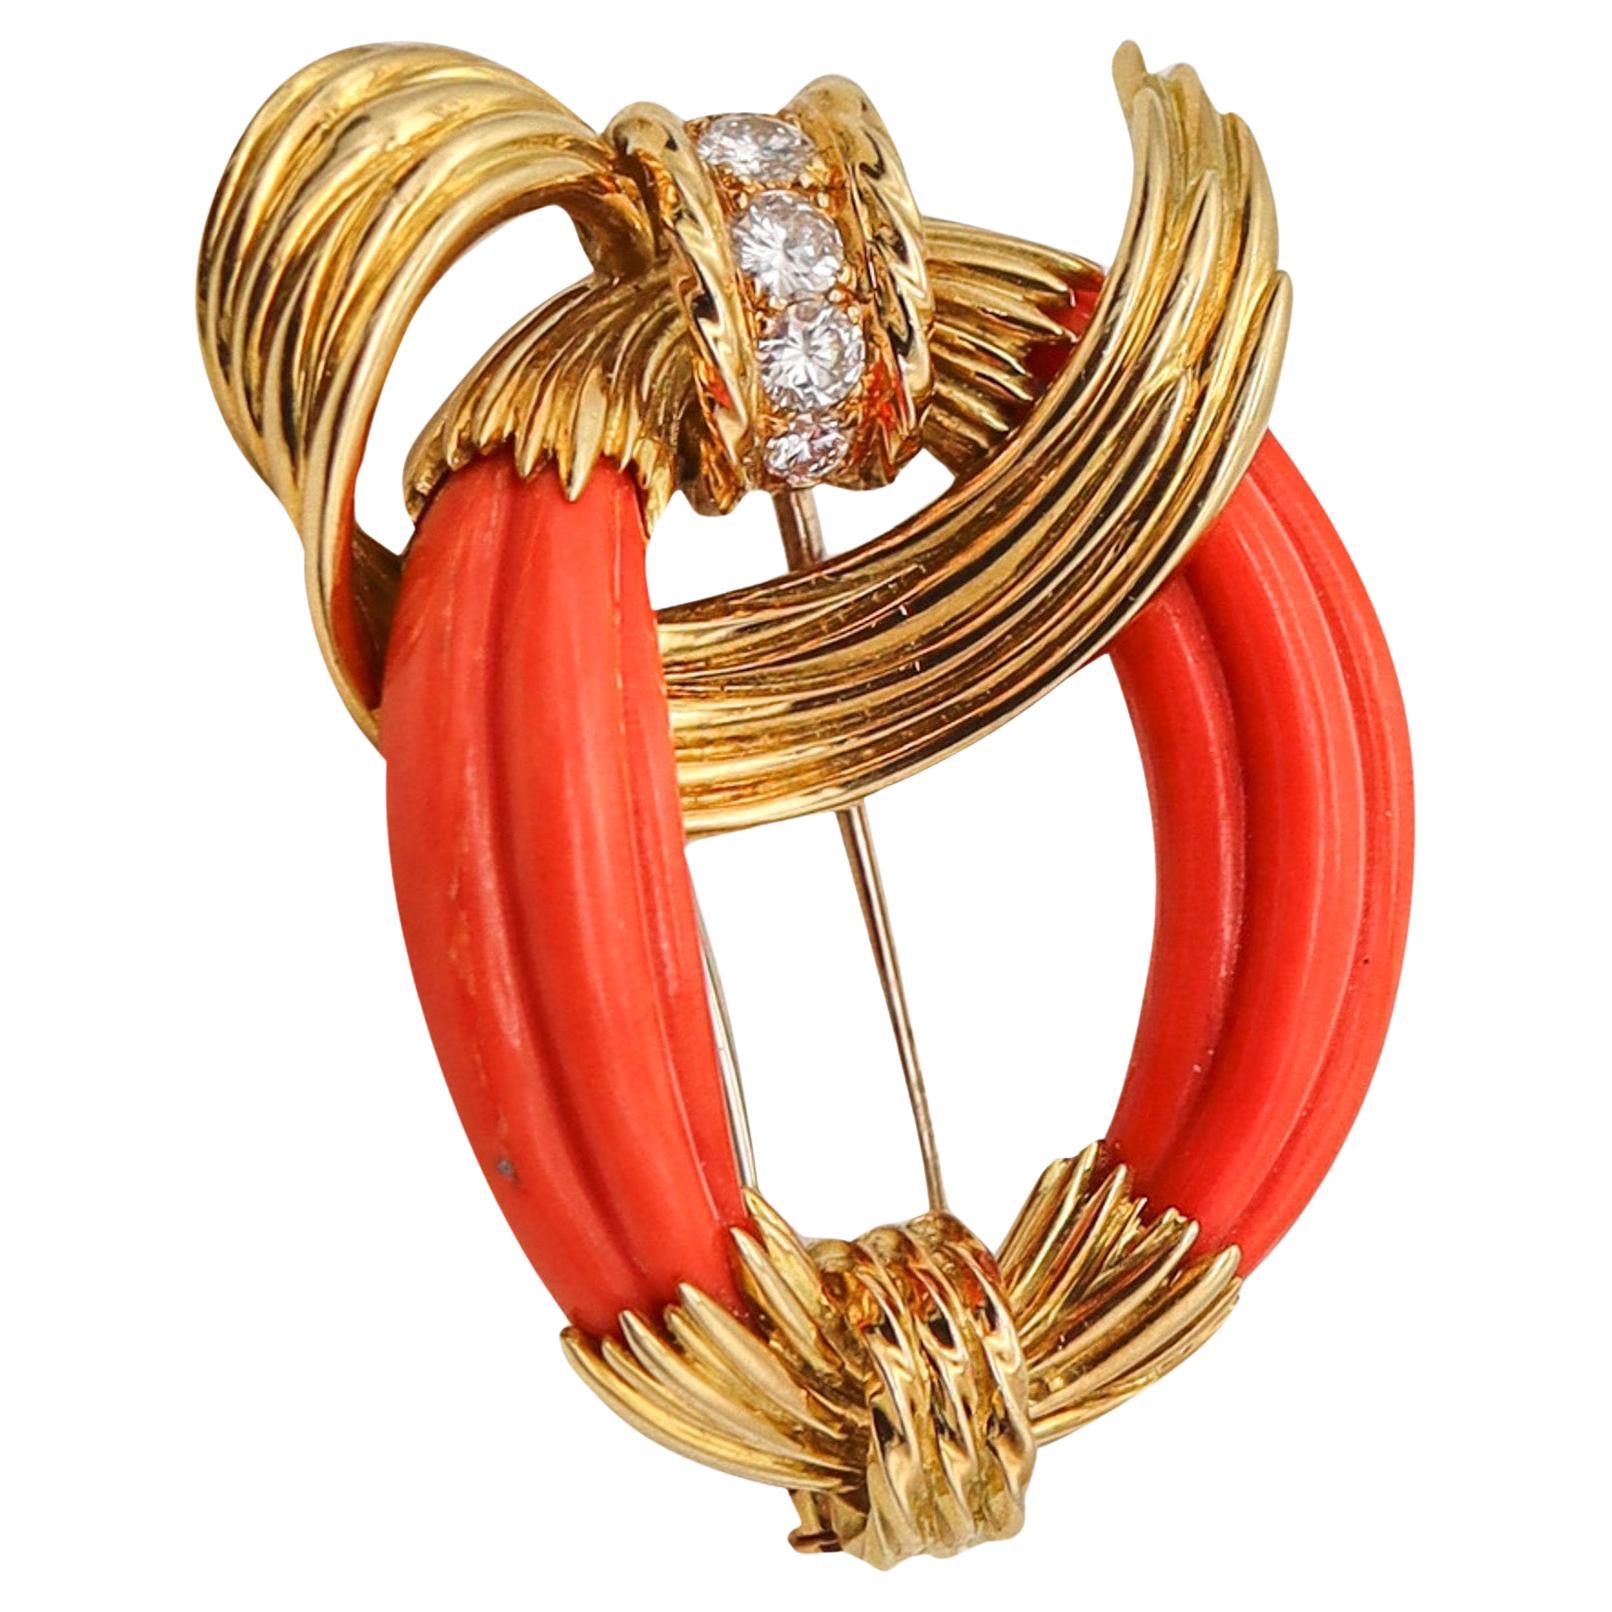 Chaumet Paris 1960 Modernist Pendant Brooch In 18Kt Gold With Coral And Diamonds